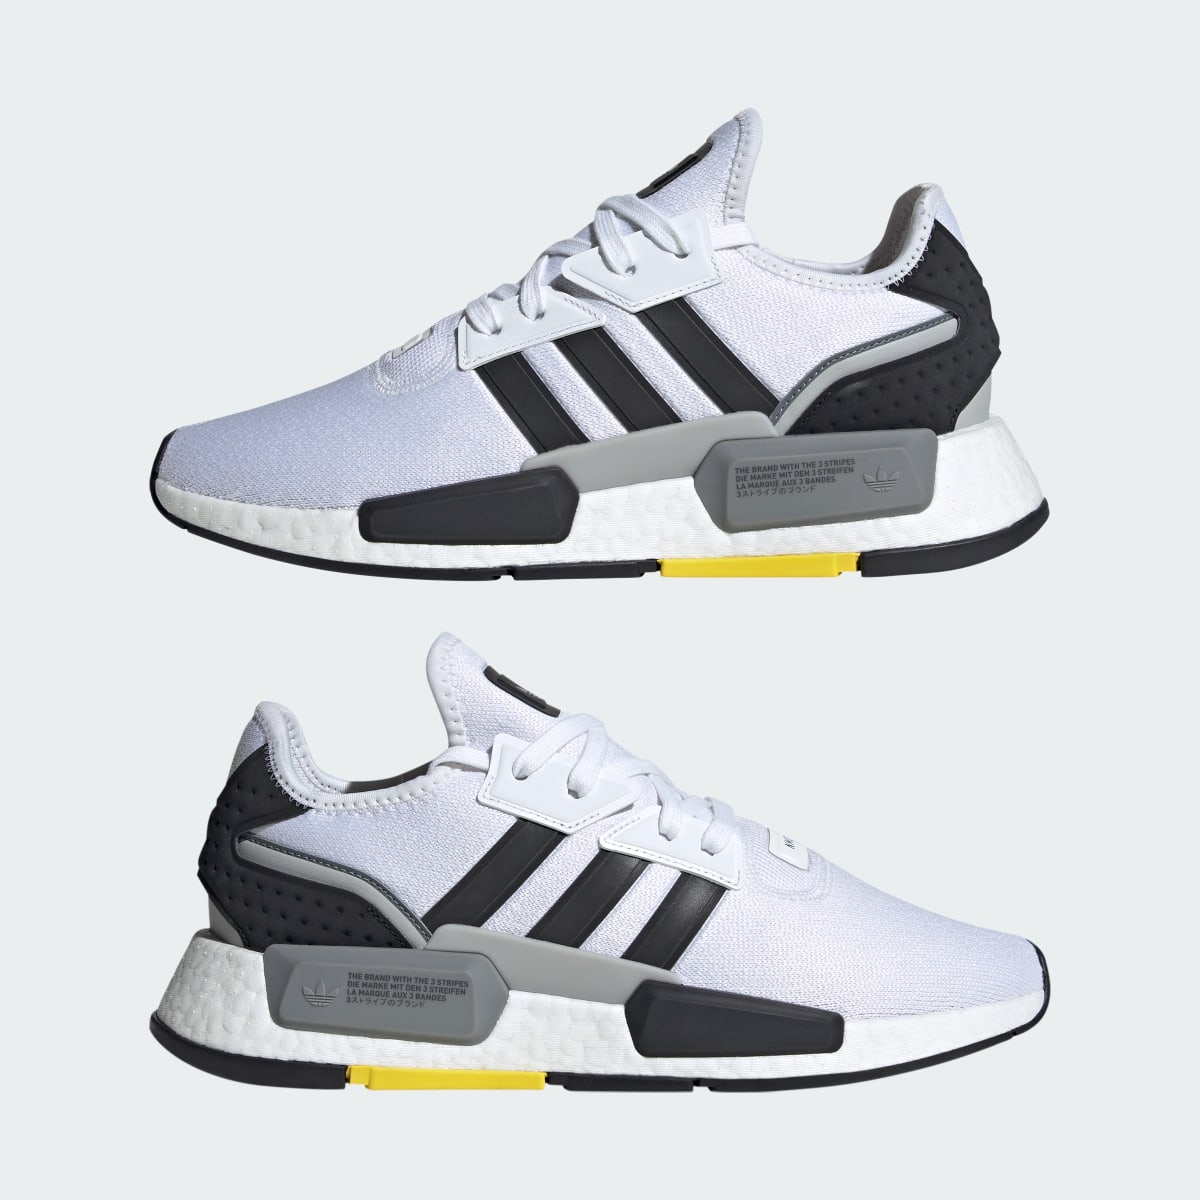 Adidas NMD_G1 Shoes. 14